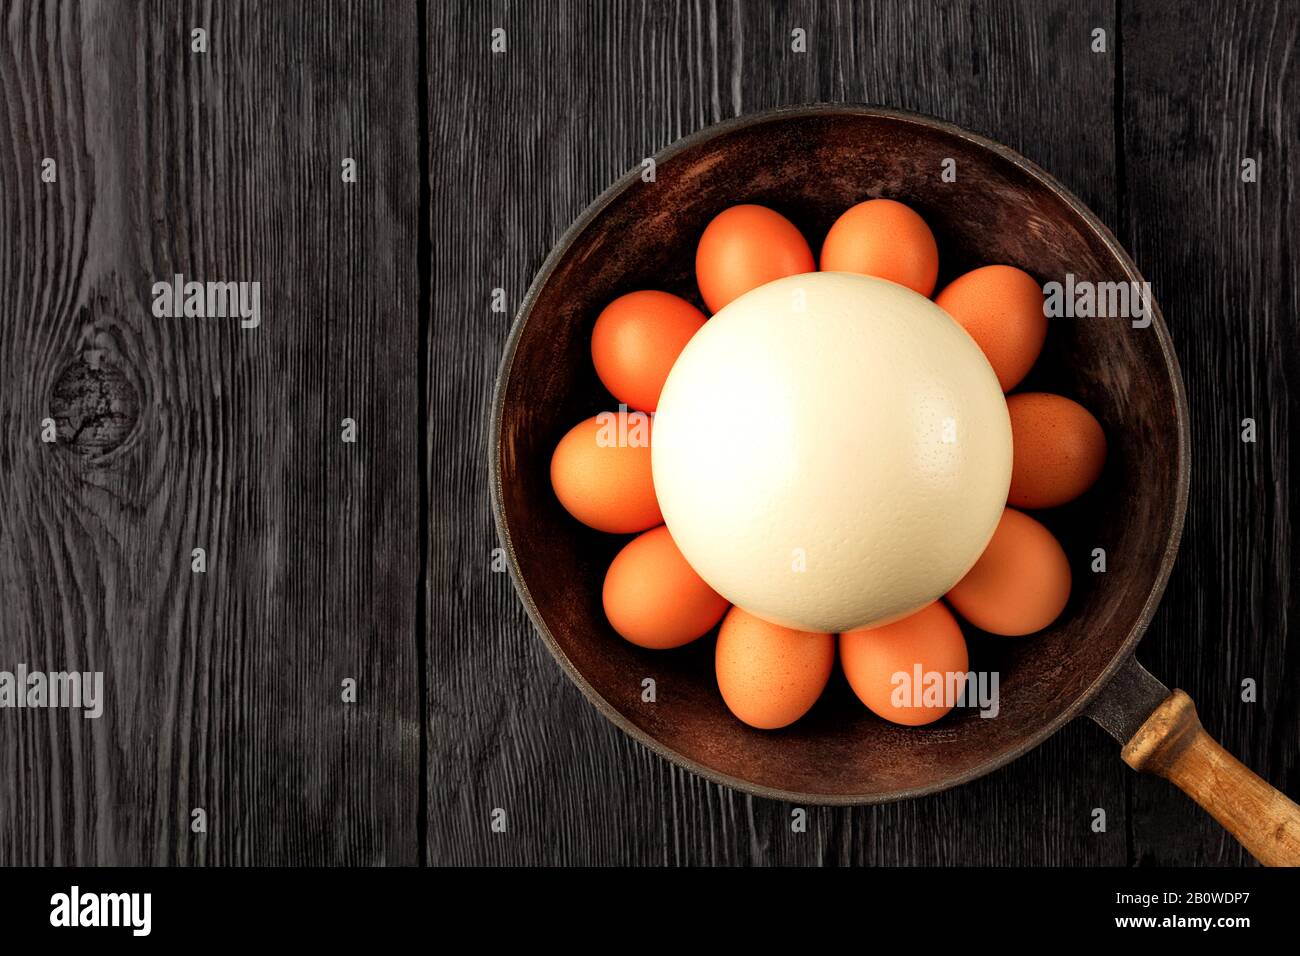 Large ostrich egg surrounded by chicken eggs in an old cast-iron pan, close-up. Stock Photo